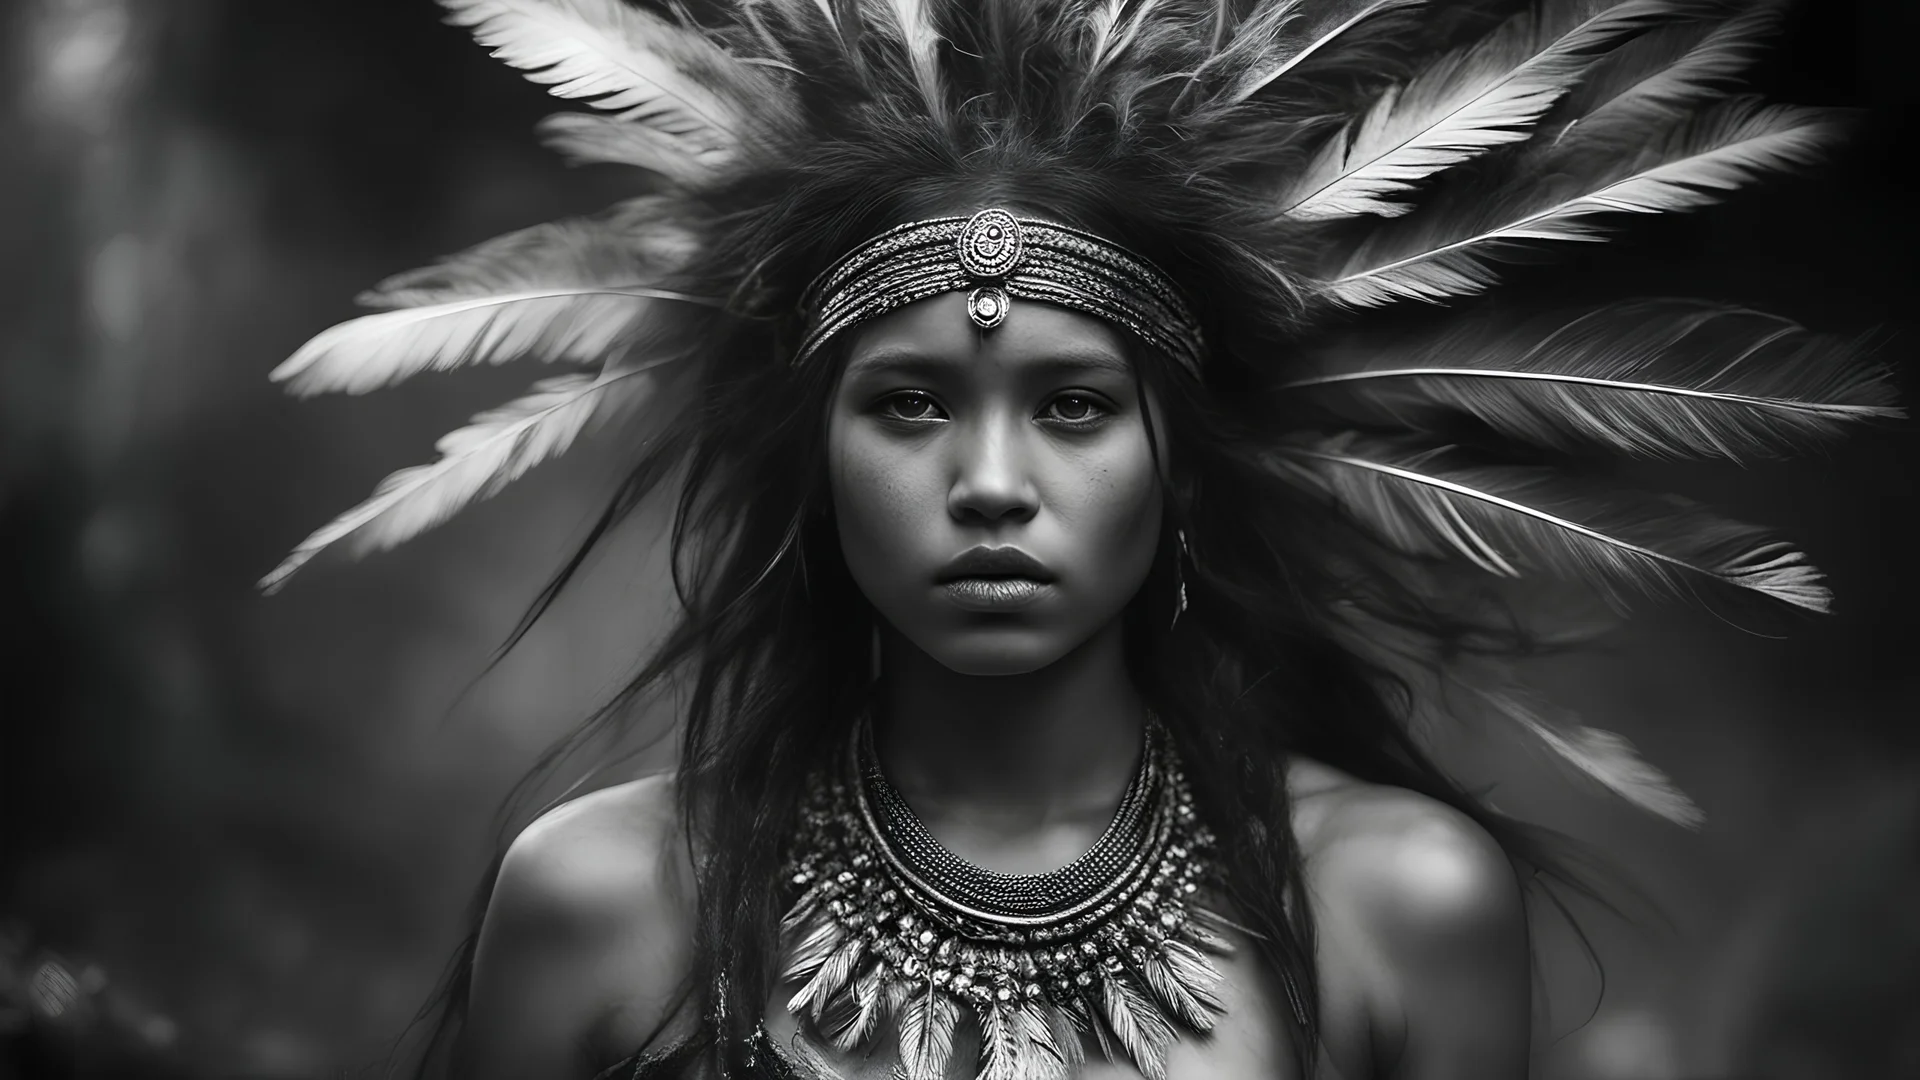 Photoreal unearthly gorgeous indigenous godlike mayan girl adorned in clothes adorned with feathers that flutter with every step exuding beauty and hair cascading down her back like a waterfall of obsidian and eyes holding a spark of wild intelligence shrouded in extreme pitch black darkness by lee jeffries, otherworldly creature, in the style of fantasy movies, full lenght shot on Hasselblad h6d-400c, zeiss prime lens, bokeh like f/0.8, tilt-shift lens